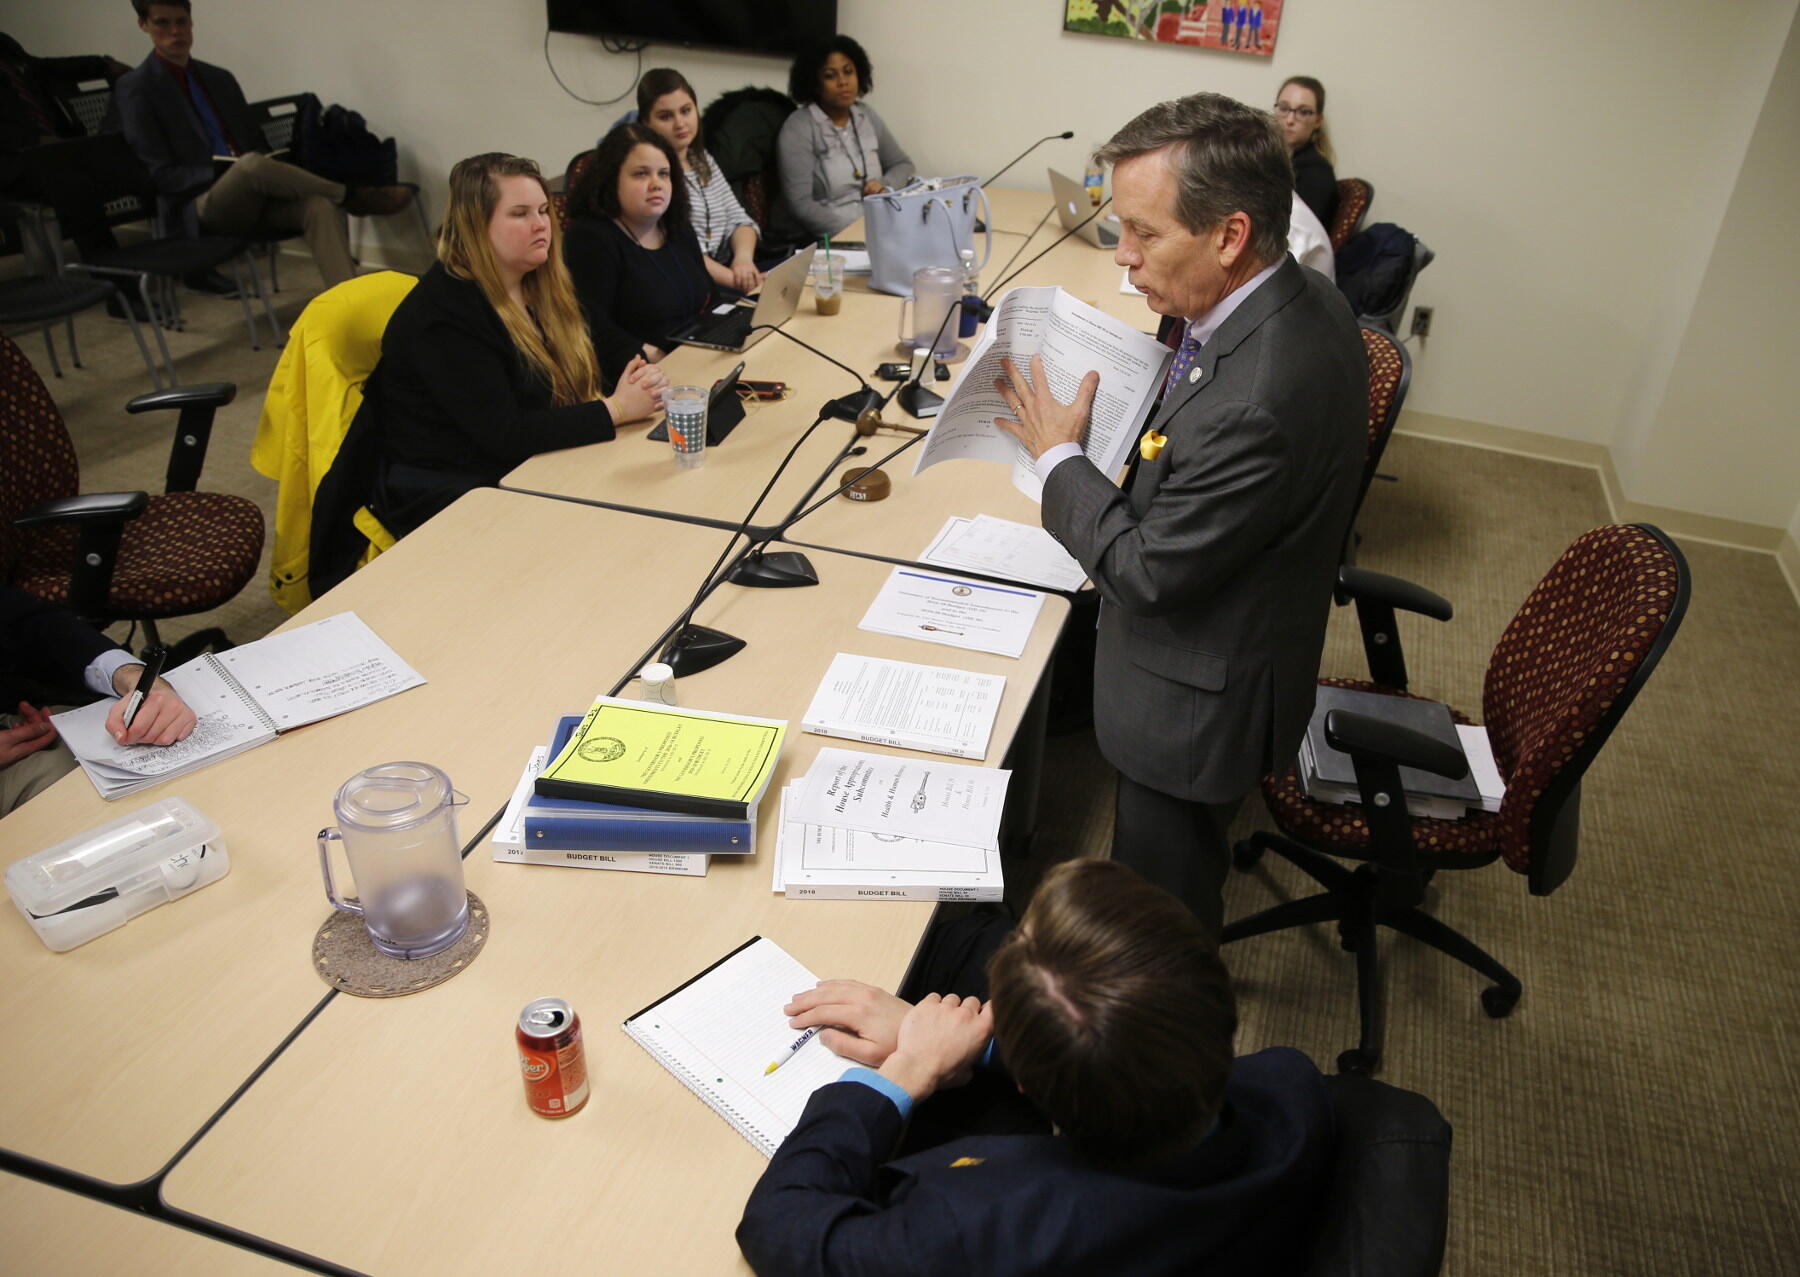 Virginia Capitol Semester students meet with House Appropriations Chairman S. Chris Jones to discuss the finer points of putting together a $115 billion government during a seminar on February 19.